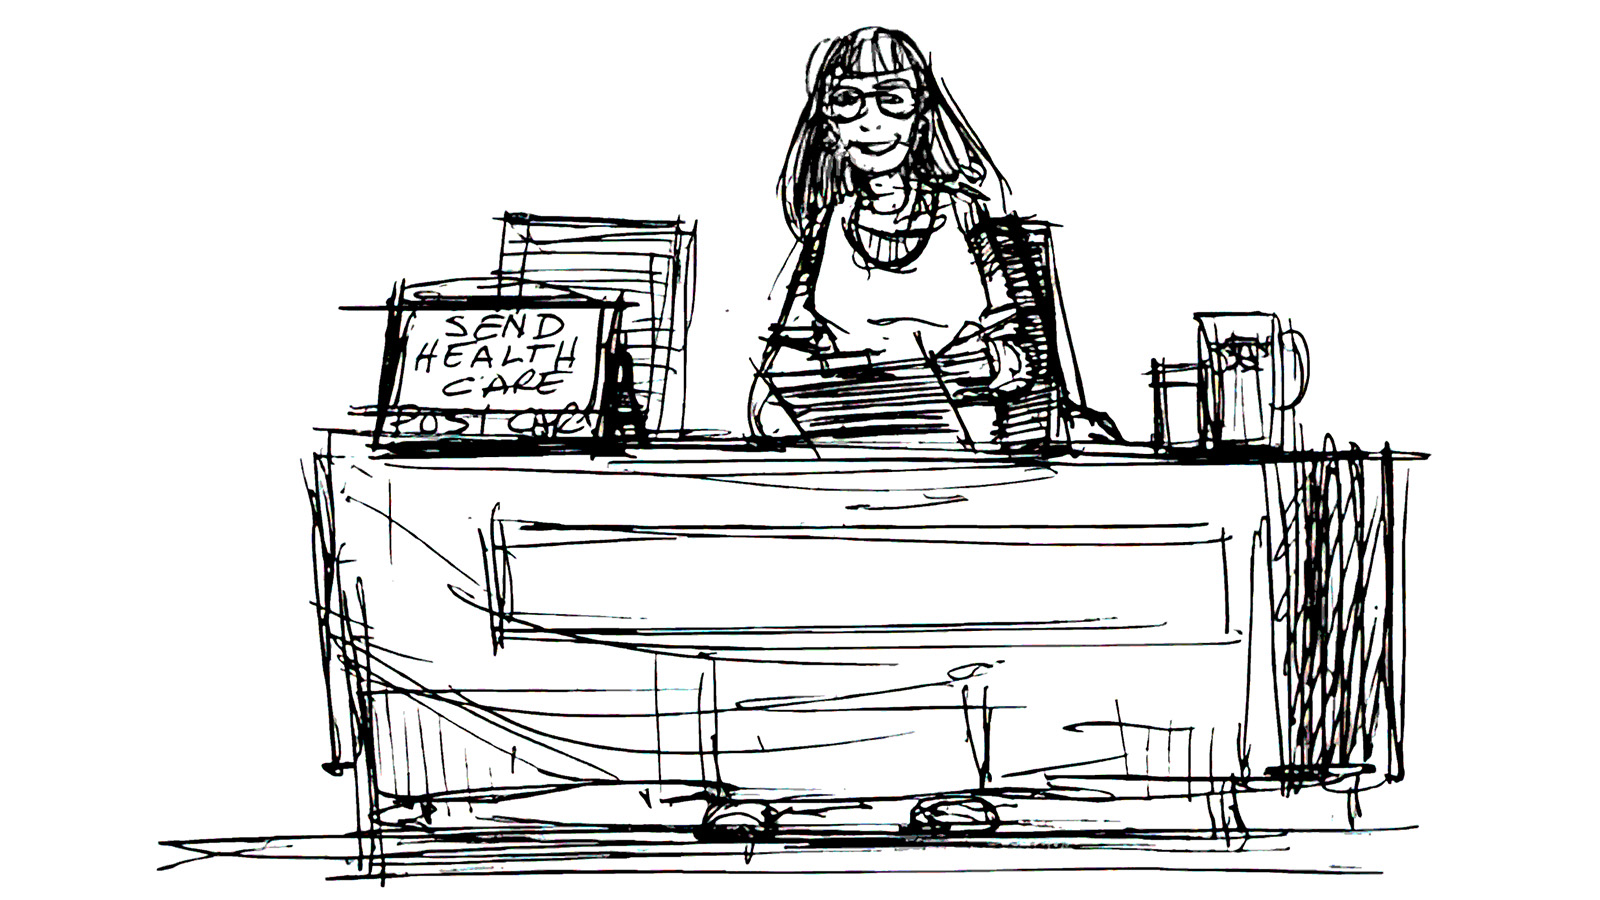 drawing of woman sitting behind a table with a clipboard and a sign that says "Send healthcare postcards"